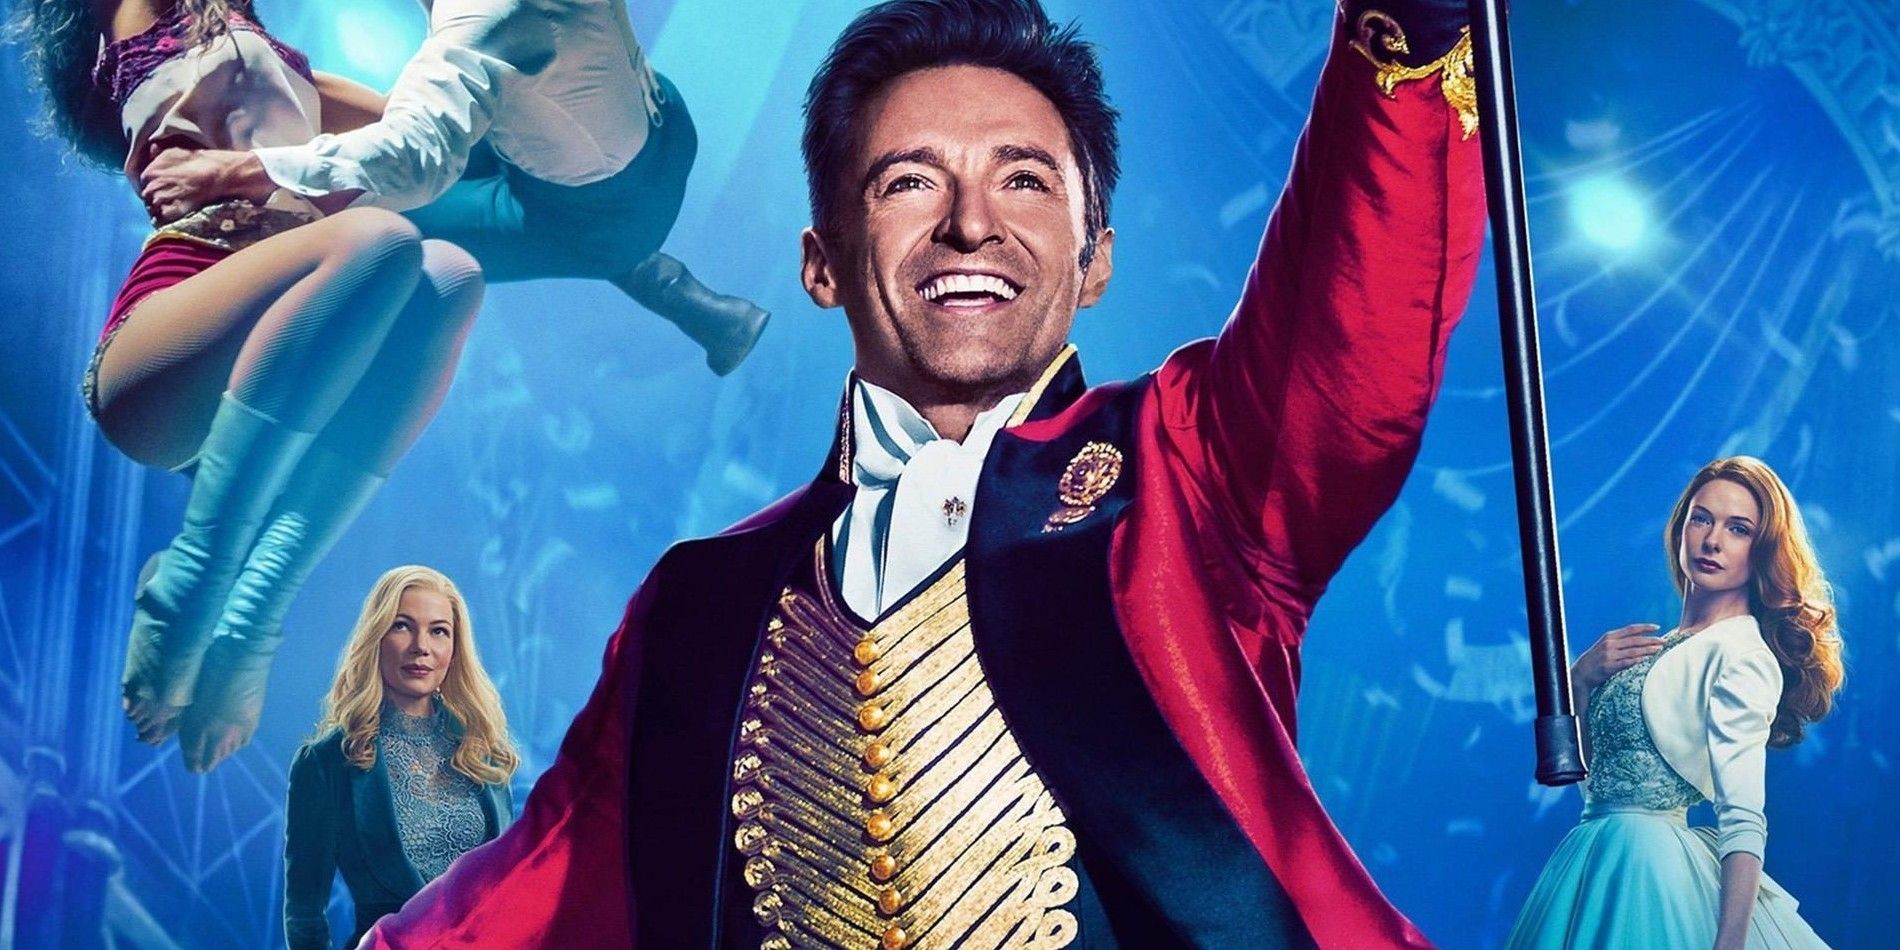 The Greatest Showman All 9 Songs Ranked From Worst To Best